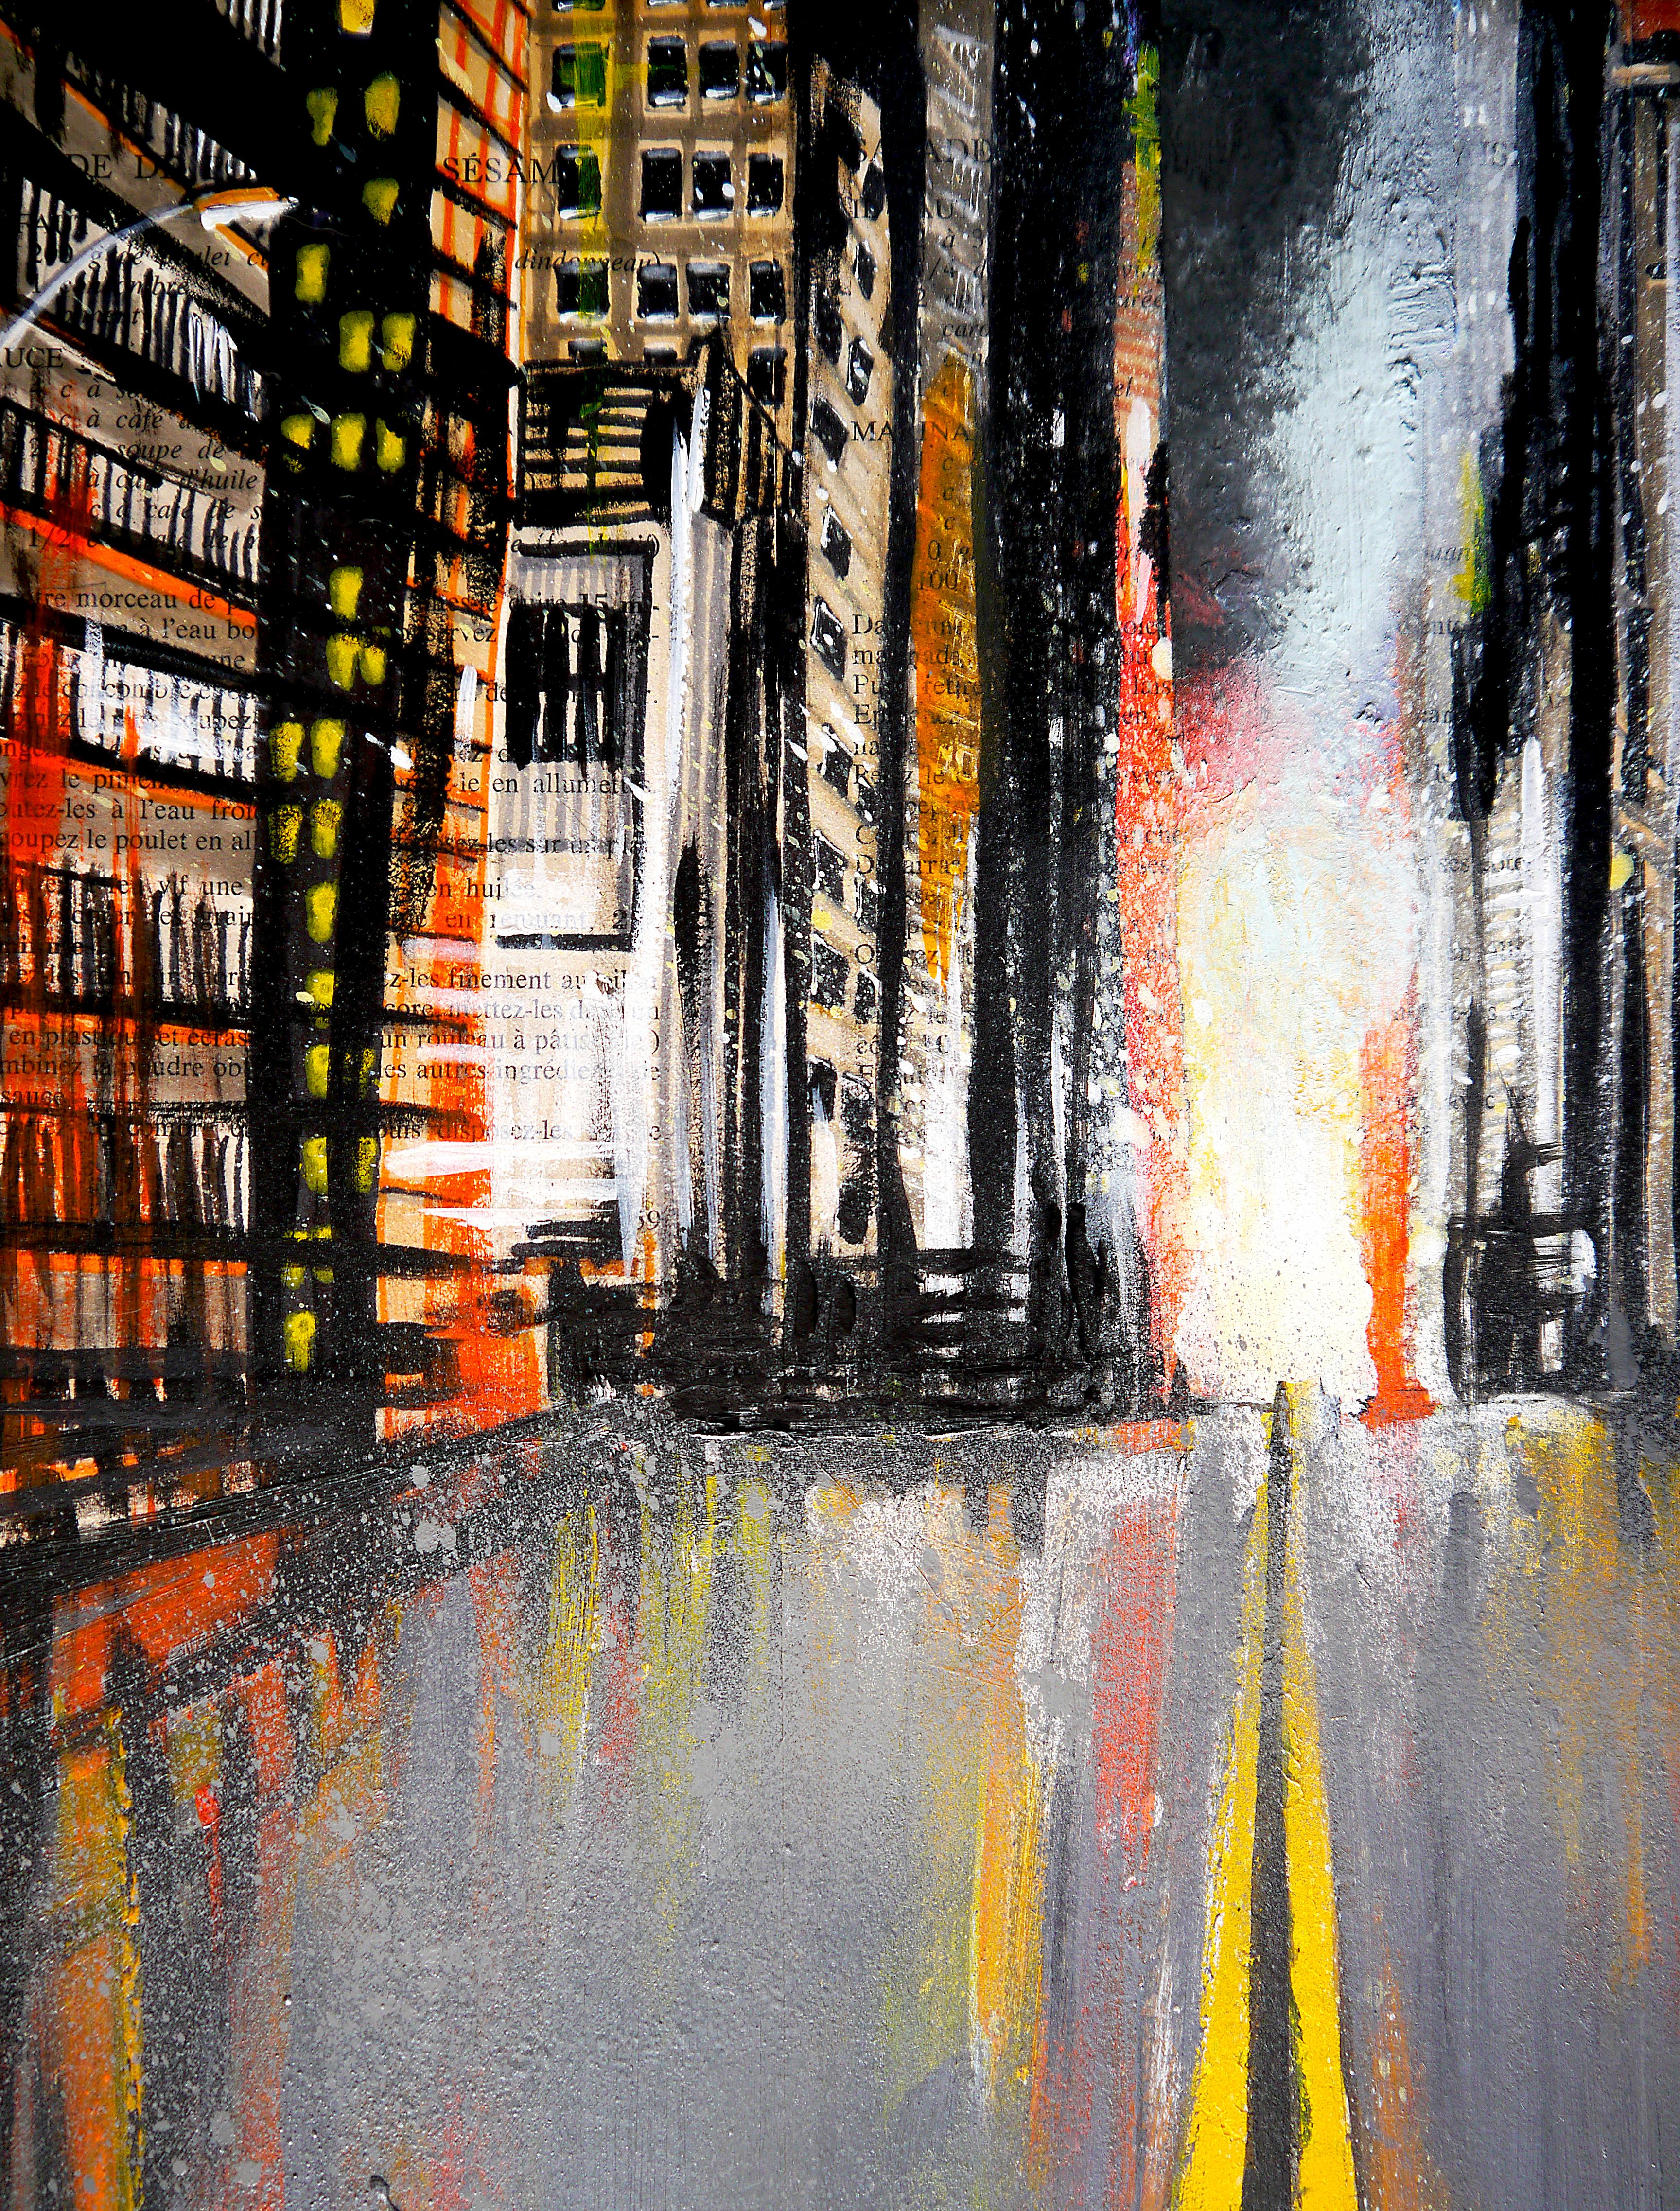 Road Line III

Landscape - Sky scrappers, office- NYC Building avenue Painting with mirror effect 
Technique: oil, acrylic, and ink on old book pages on wooden frame 40x40cm ■■ 15,7x15,7 inch

》》R E A D Y -- T O -- H A N G《《



❶ → Original signed